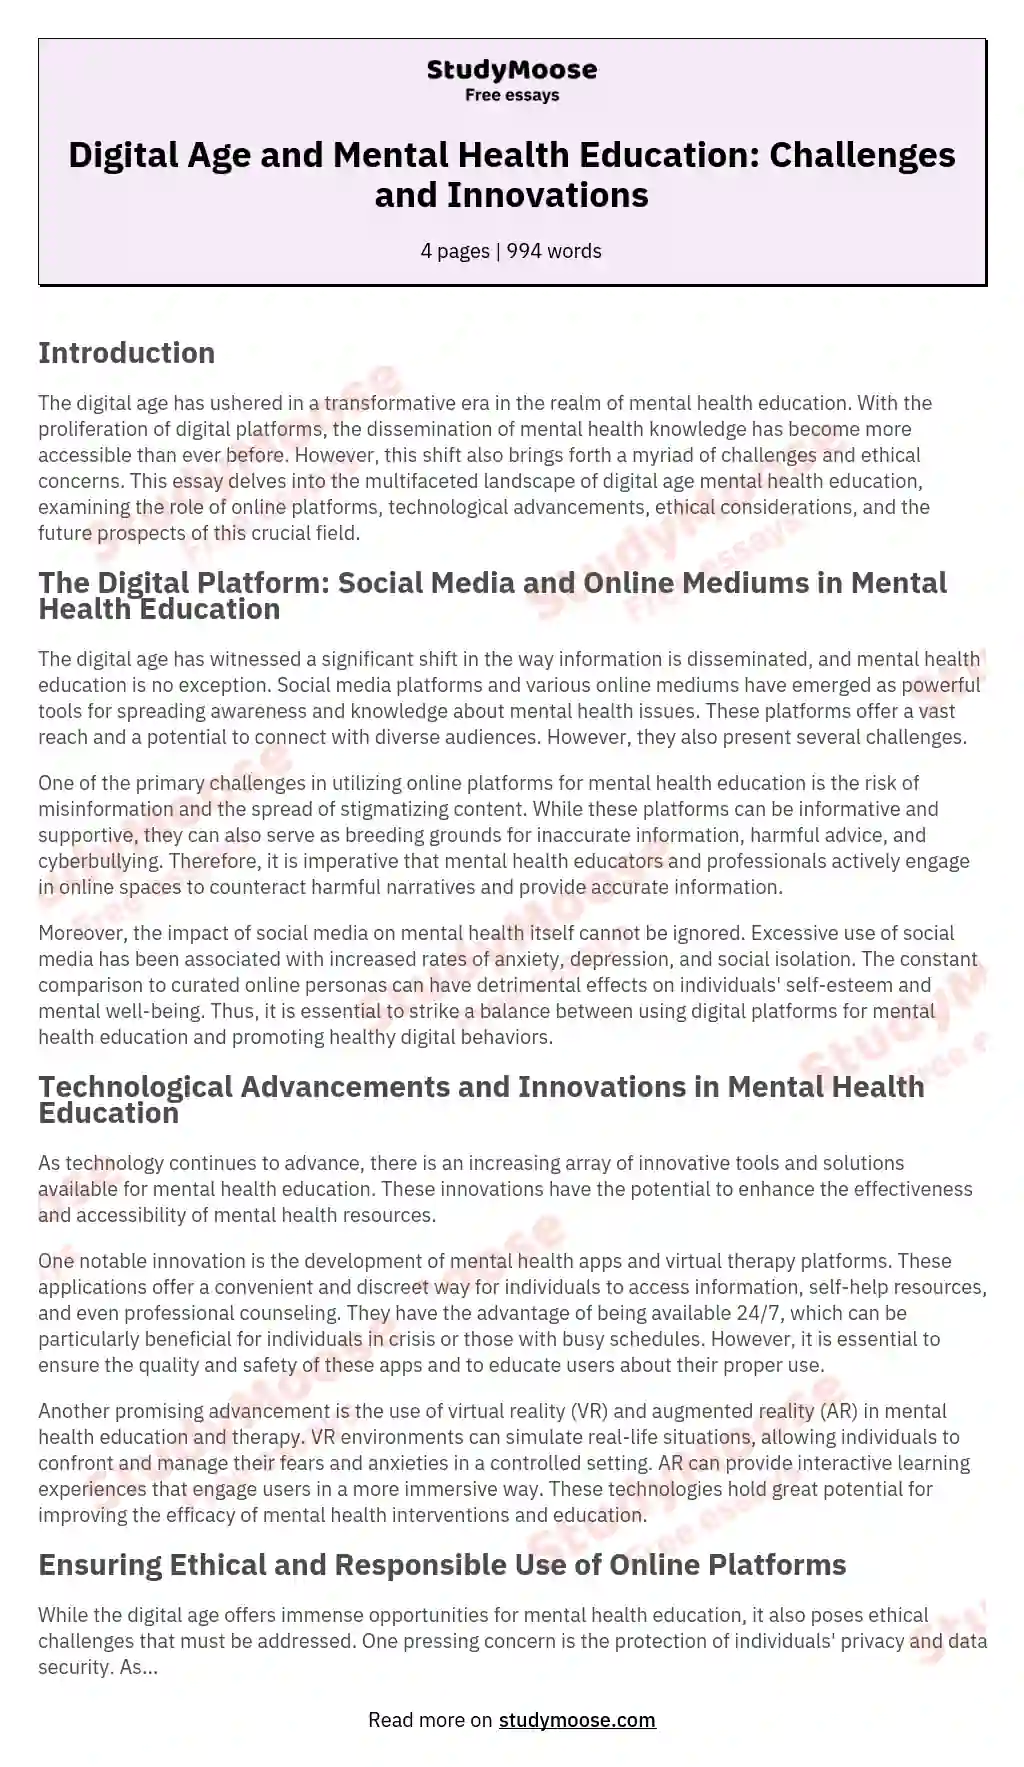 Digital Age and Mental Health Education: Challenges and Innovations essay